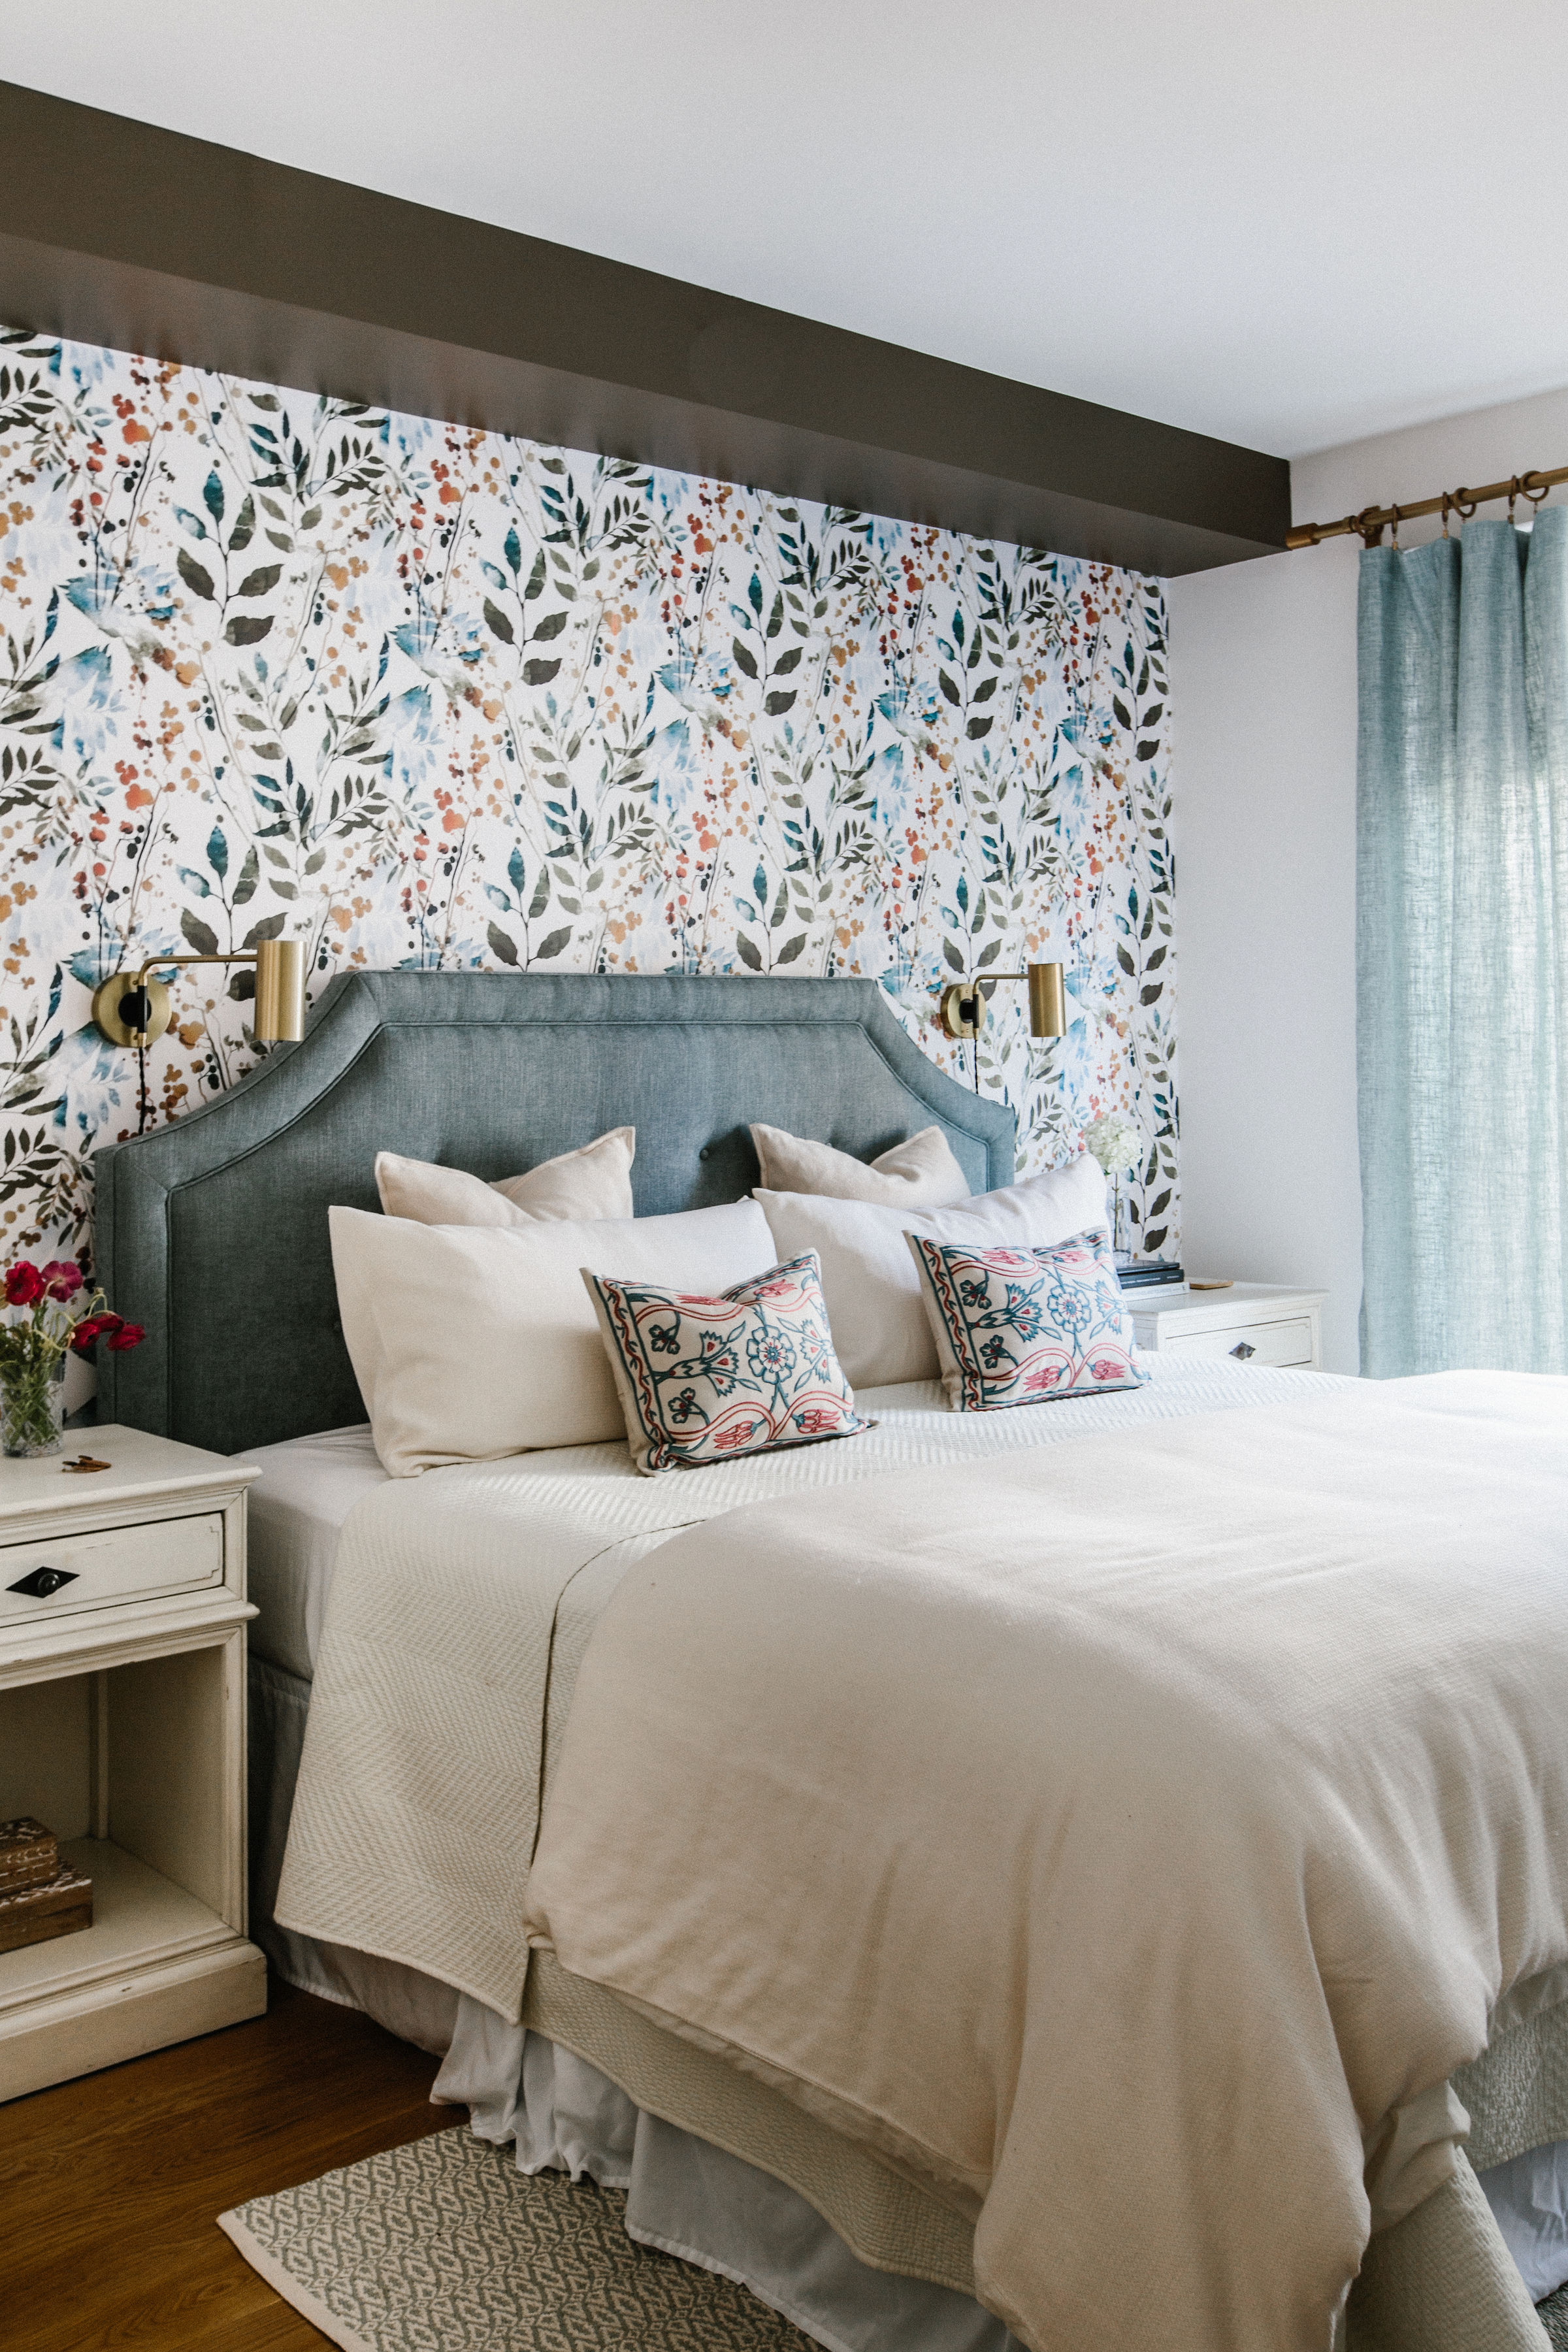 The best bedroom colors with cream, blue and orange woven into a light scheme with cream bedlinen and bedside tables, a duck egg blue headboard and delicately patterned wallpaper.